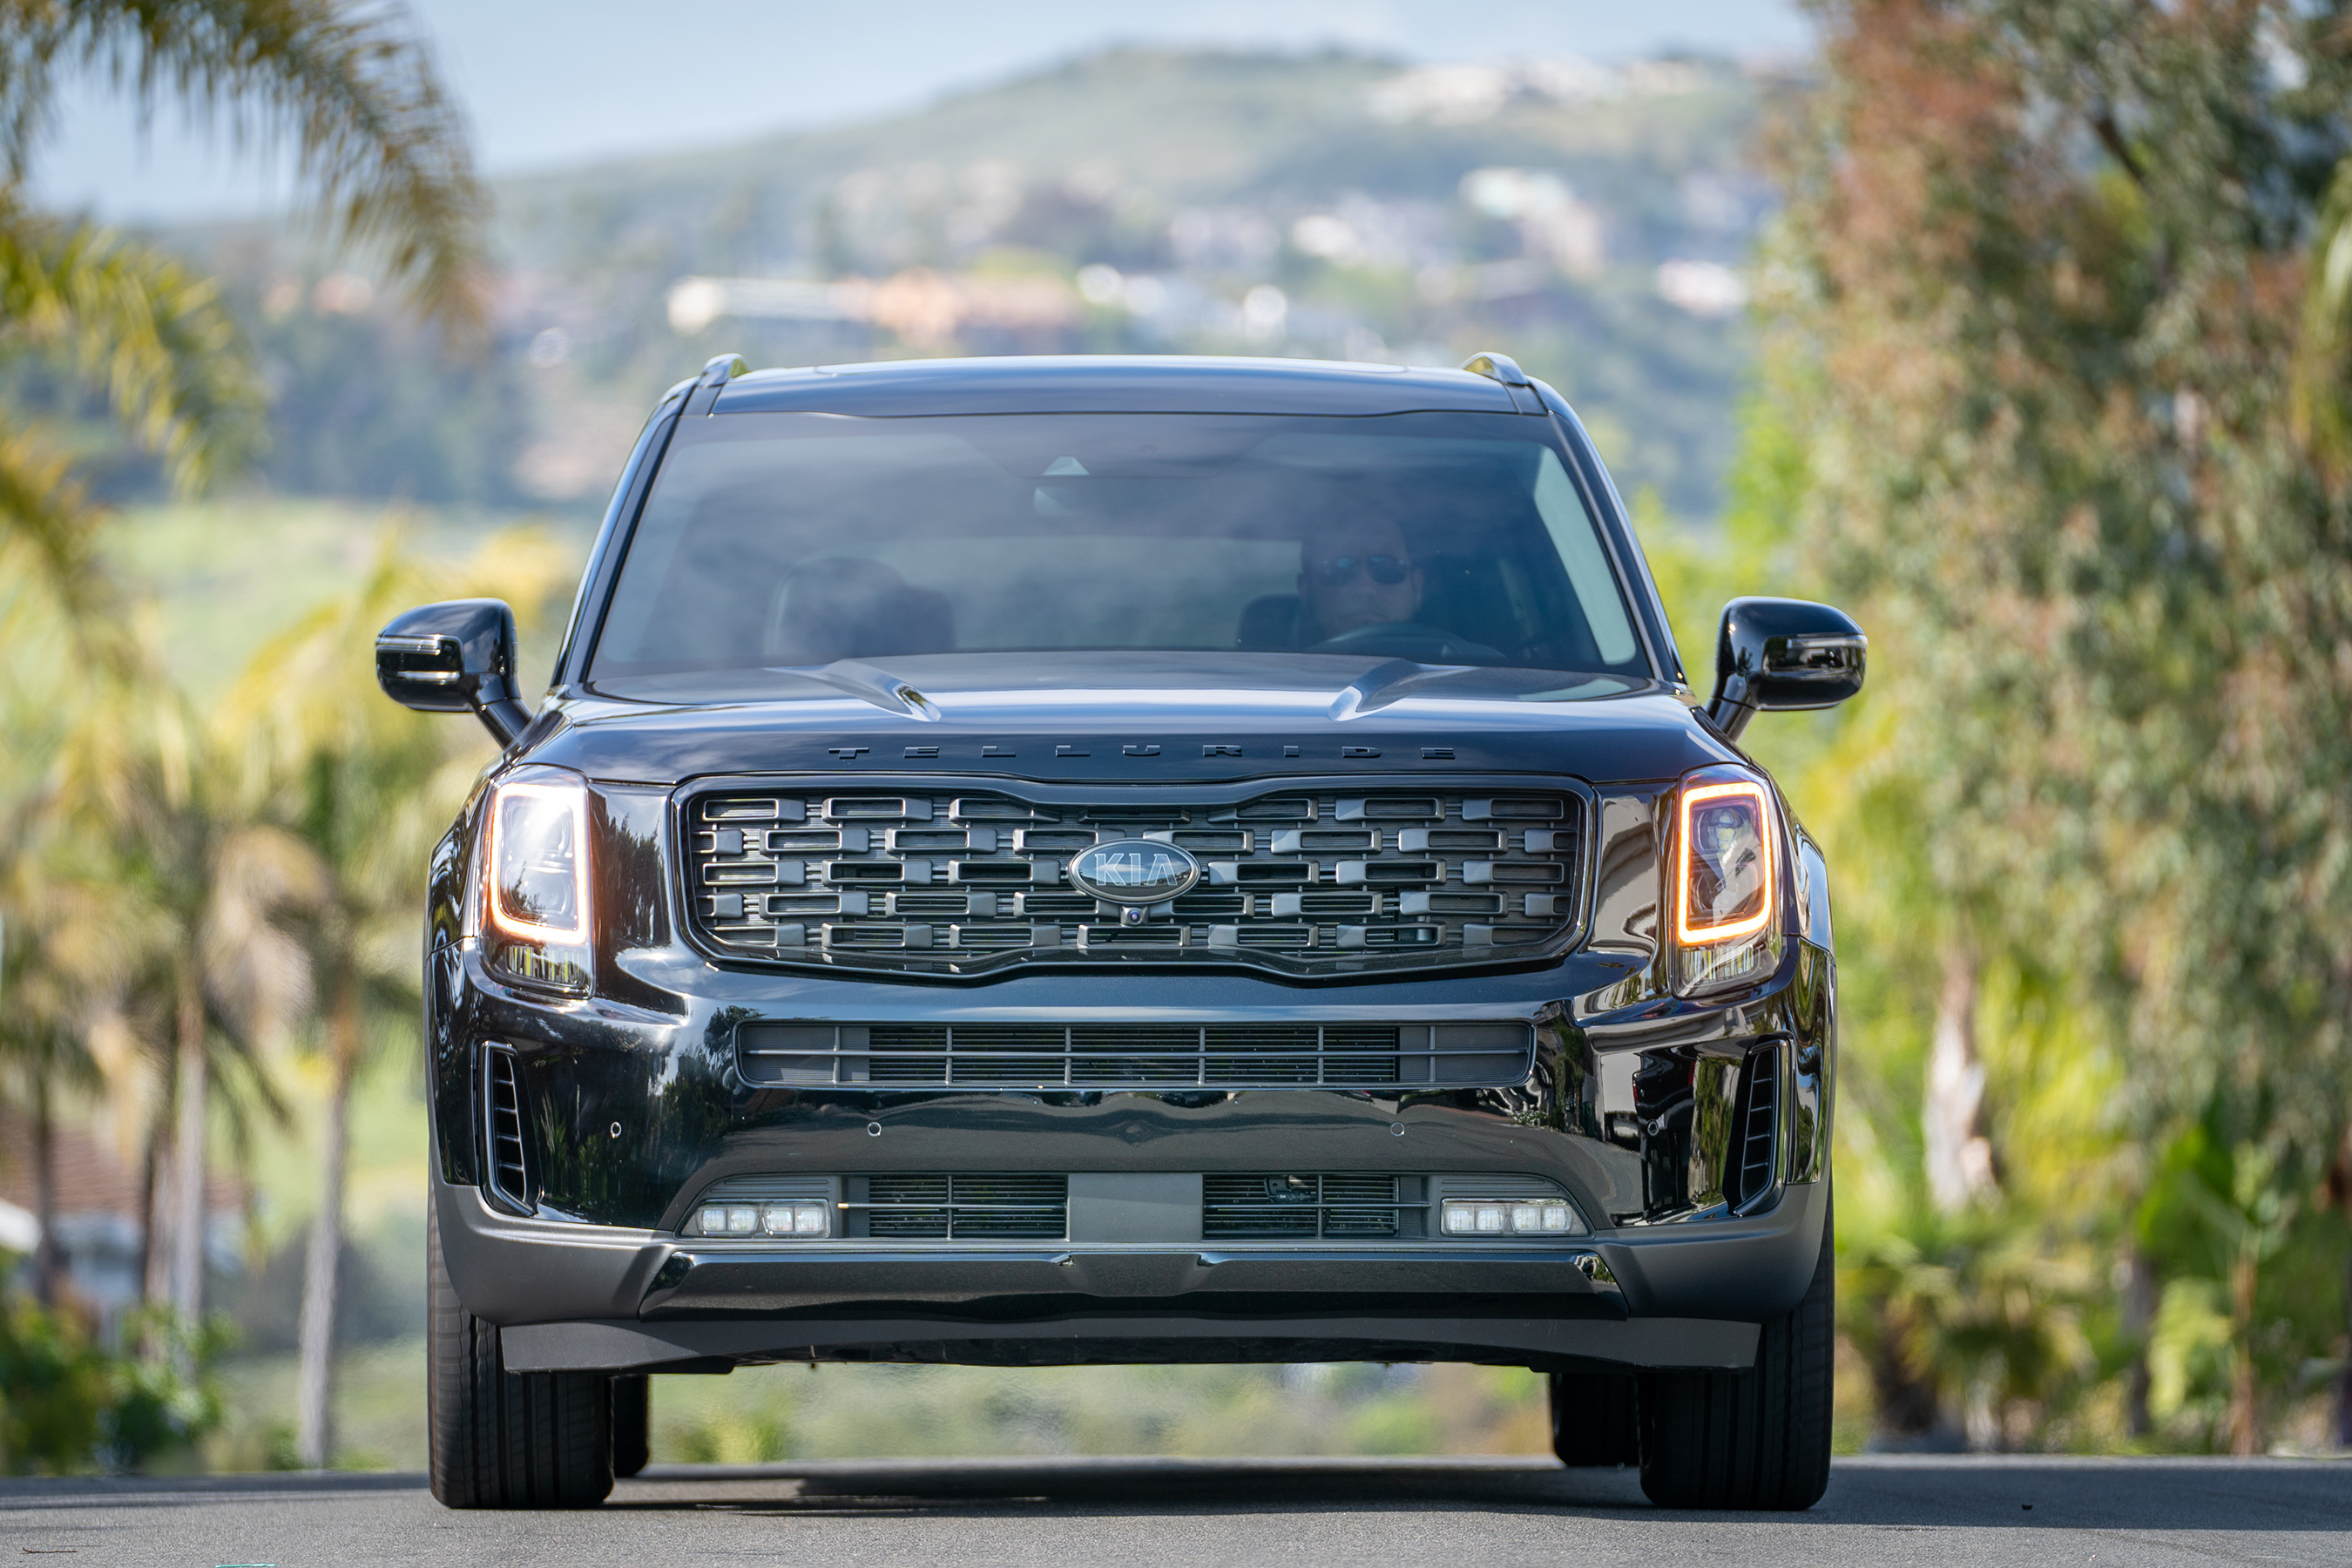 Kia's wildly popular Telluride SUV shows its darker side with new Nightfall Edition appearance package.